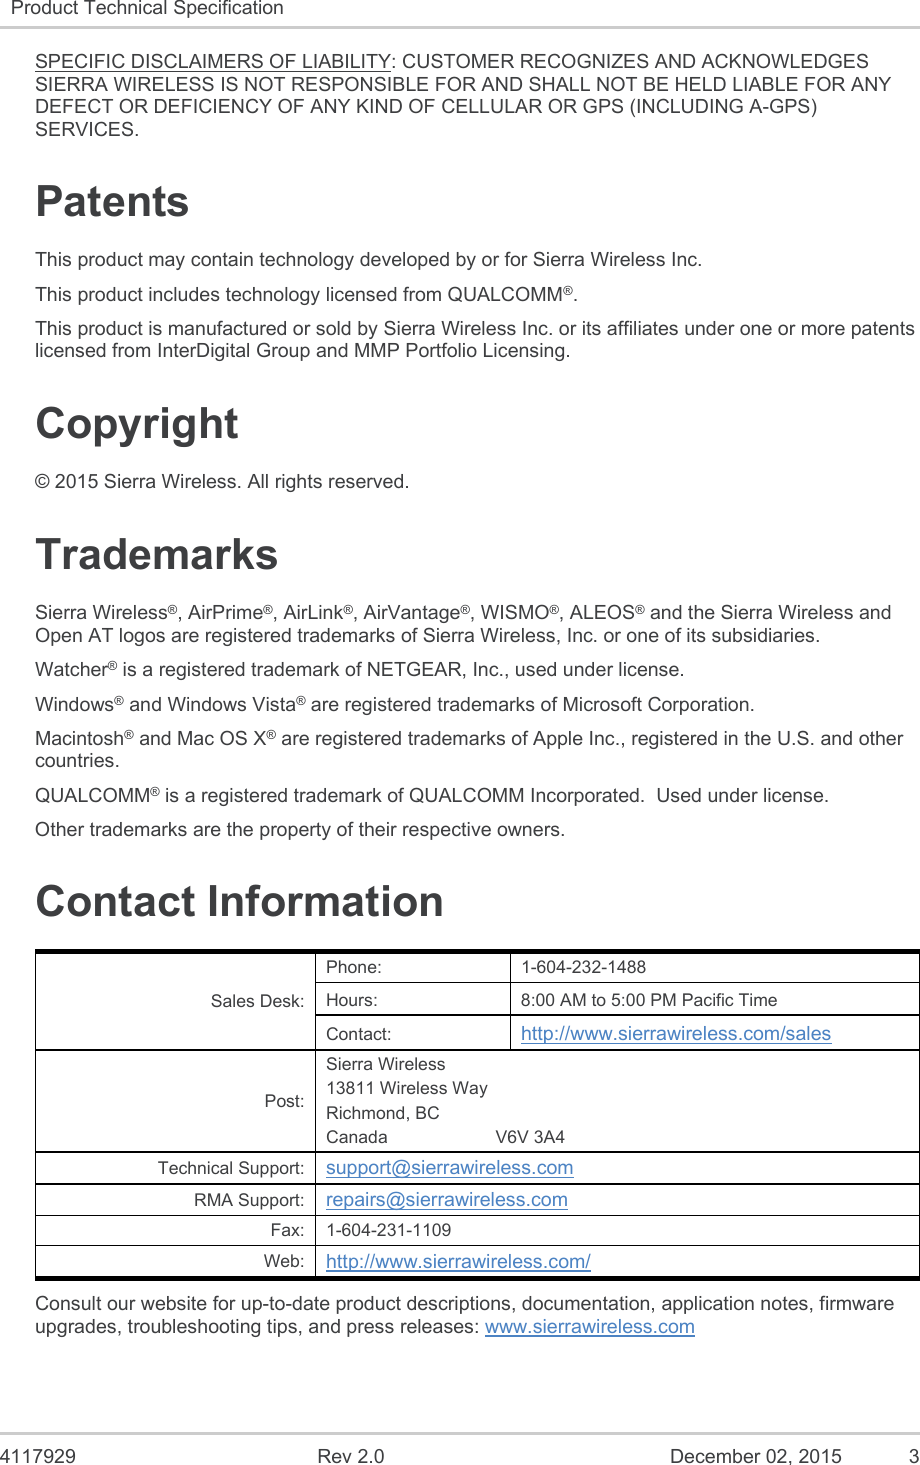  4117929  Rev 2.0  December 02, 2015  3 Product Technical Specification   SPECIFIC DISCLAIMERS OF LIABILITY: CUSTOMER RECOGNIZES AND ACKNOWLEDGES SIERRA WIRELESS IS NOT RESPONSIBLE FOR AND SHALL NOT BE HELD LIABLE FOR ANY DEFECT OR DEFICIENCY OF ANY KIND OF CELLULAR OR GPS (INCLUDING A-GPS) SERVICES. Patents This product may contain technology developed by or for Sierra Wireless Inc. This product includes technology licensed from QUALCOMM®. This product is manufactured or sold by Sierra Wireless Inc. or its affiliates under one or more patents licensed from InterDigital Group and MMP Portfolio Licensing. Copyright © 2015 Sierra Wireless. All rights reserved. Trademarks Sierra Wireless®, AirPrime®, AirLink®, AirVantage®, WISMO®, ALEOS® and the Sierra Wireless and Open AT logos are registered trademarks of Sierra Wireless, Inc. or one of its subsidiaries. Watcher® is a registered trademark of NETGEAR, Inc., used under license. Windows® and Windows Vista® are registered trademarks of Microsoft Corporation. Macintosh® and Mac OS X® are registered trademarks of Apple Inc., registered in the U.S. and other countries. QUALCOMM® is a registered trademark of QUALCOMM Incorporated.  Used under license. Other trademarks are the property of their respective owners. Contact Information Sales Desk: Phone:  1-604-232-1488 Hours:  8:00 AM to 5:00 PM Pacific Time Contact:  http://www.sierrawireless.com/sales Post: Sierra Wireless 13811 Wireless Way Richmond, BC Canada                      V6V 3A4 Technical Support:  support@sierrawireless.com RMA Support:  repairs@sierrawireless.com Fax:  1-604-231-1109 Web:  http://www.sierrawireless.com/ Consult our website for up-to-date product descriptions, documentation, application notes, firmware upgrades, troubleshooting tips, and press releases: www.sierrawireless.com 